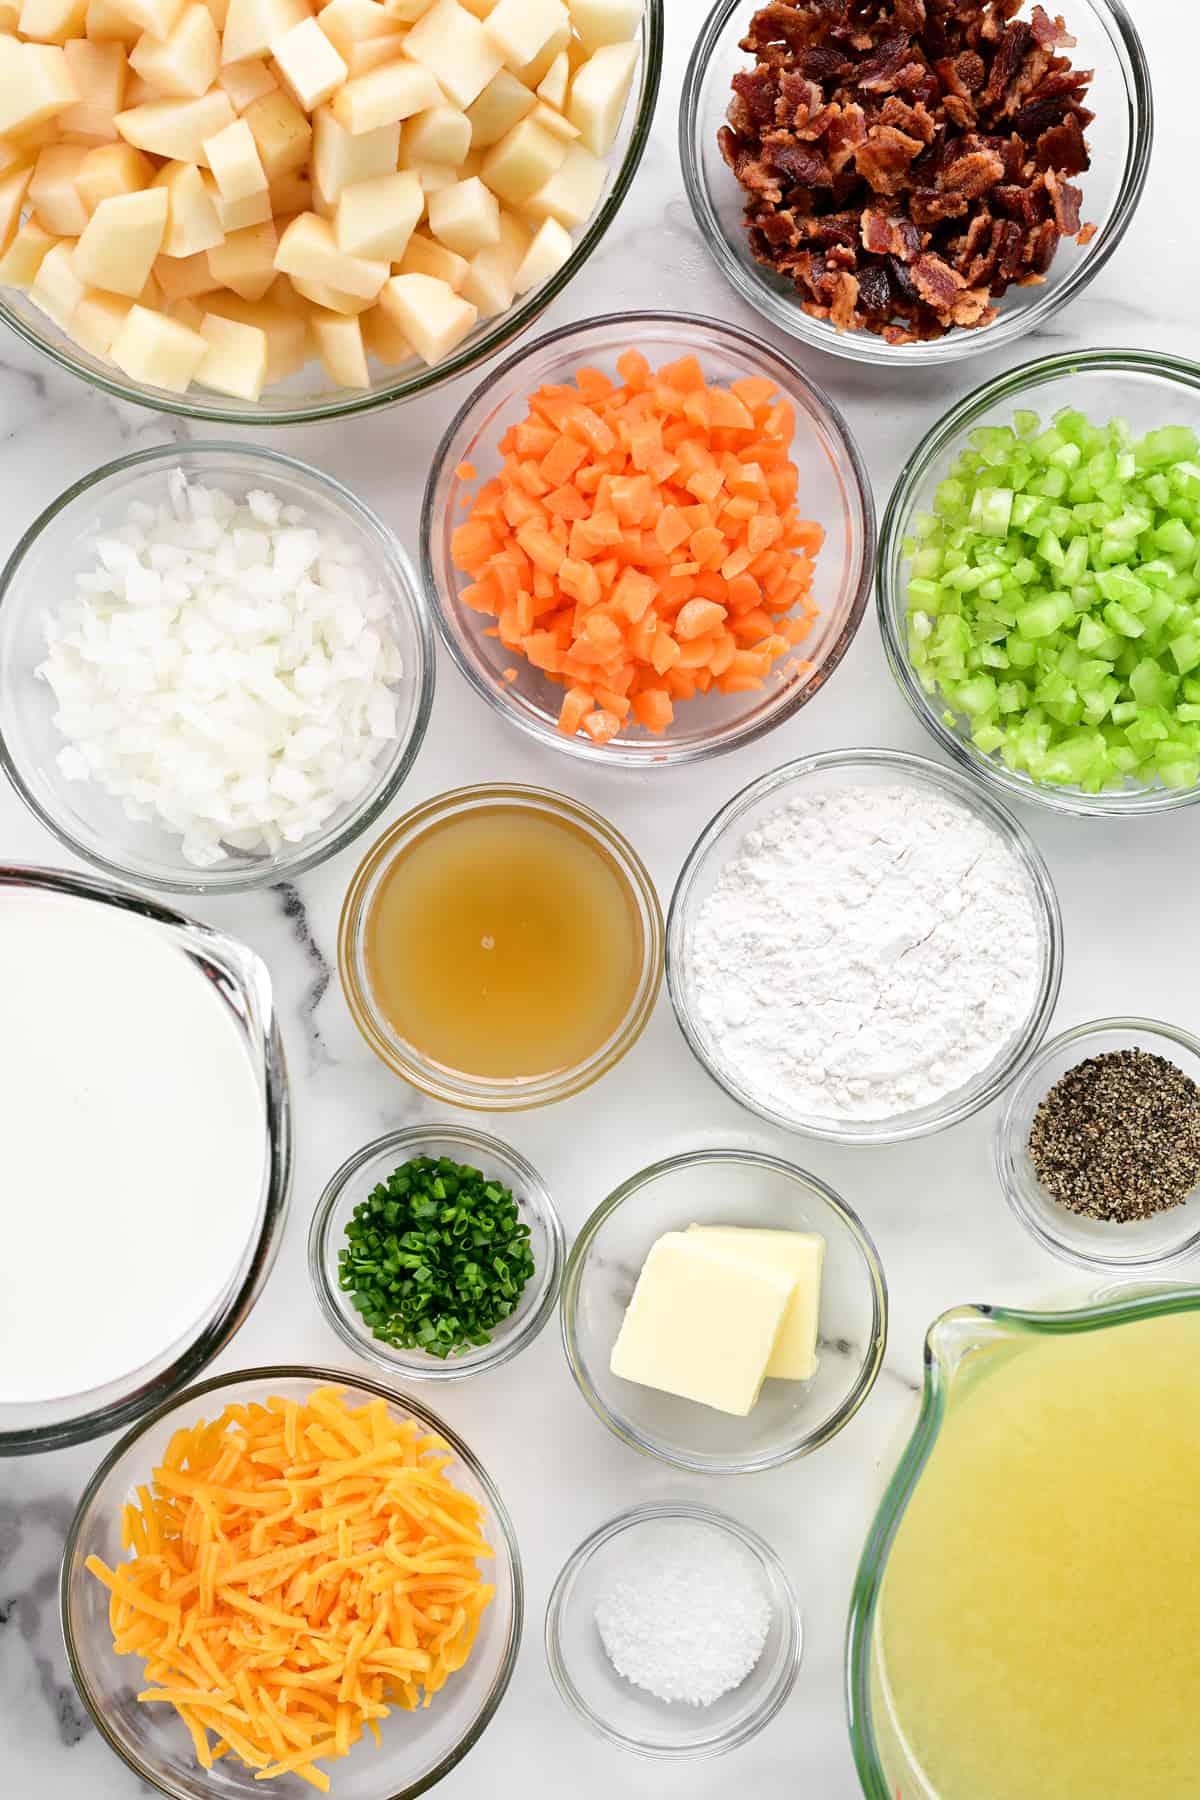 ingredients laid out in bowls on a countertop.